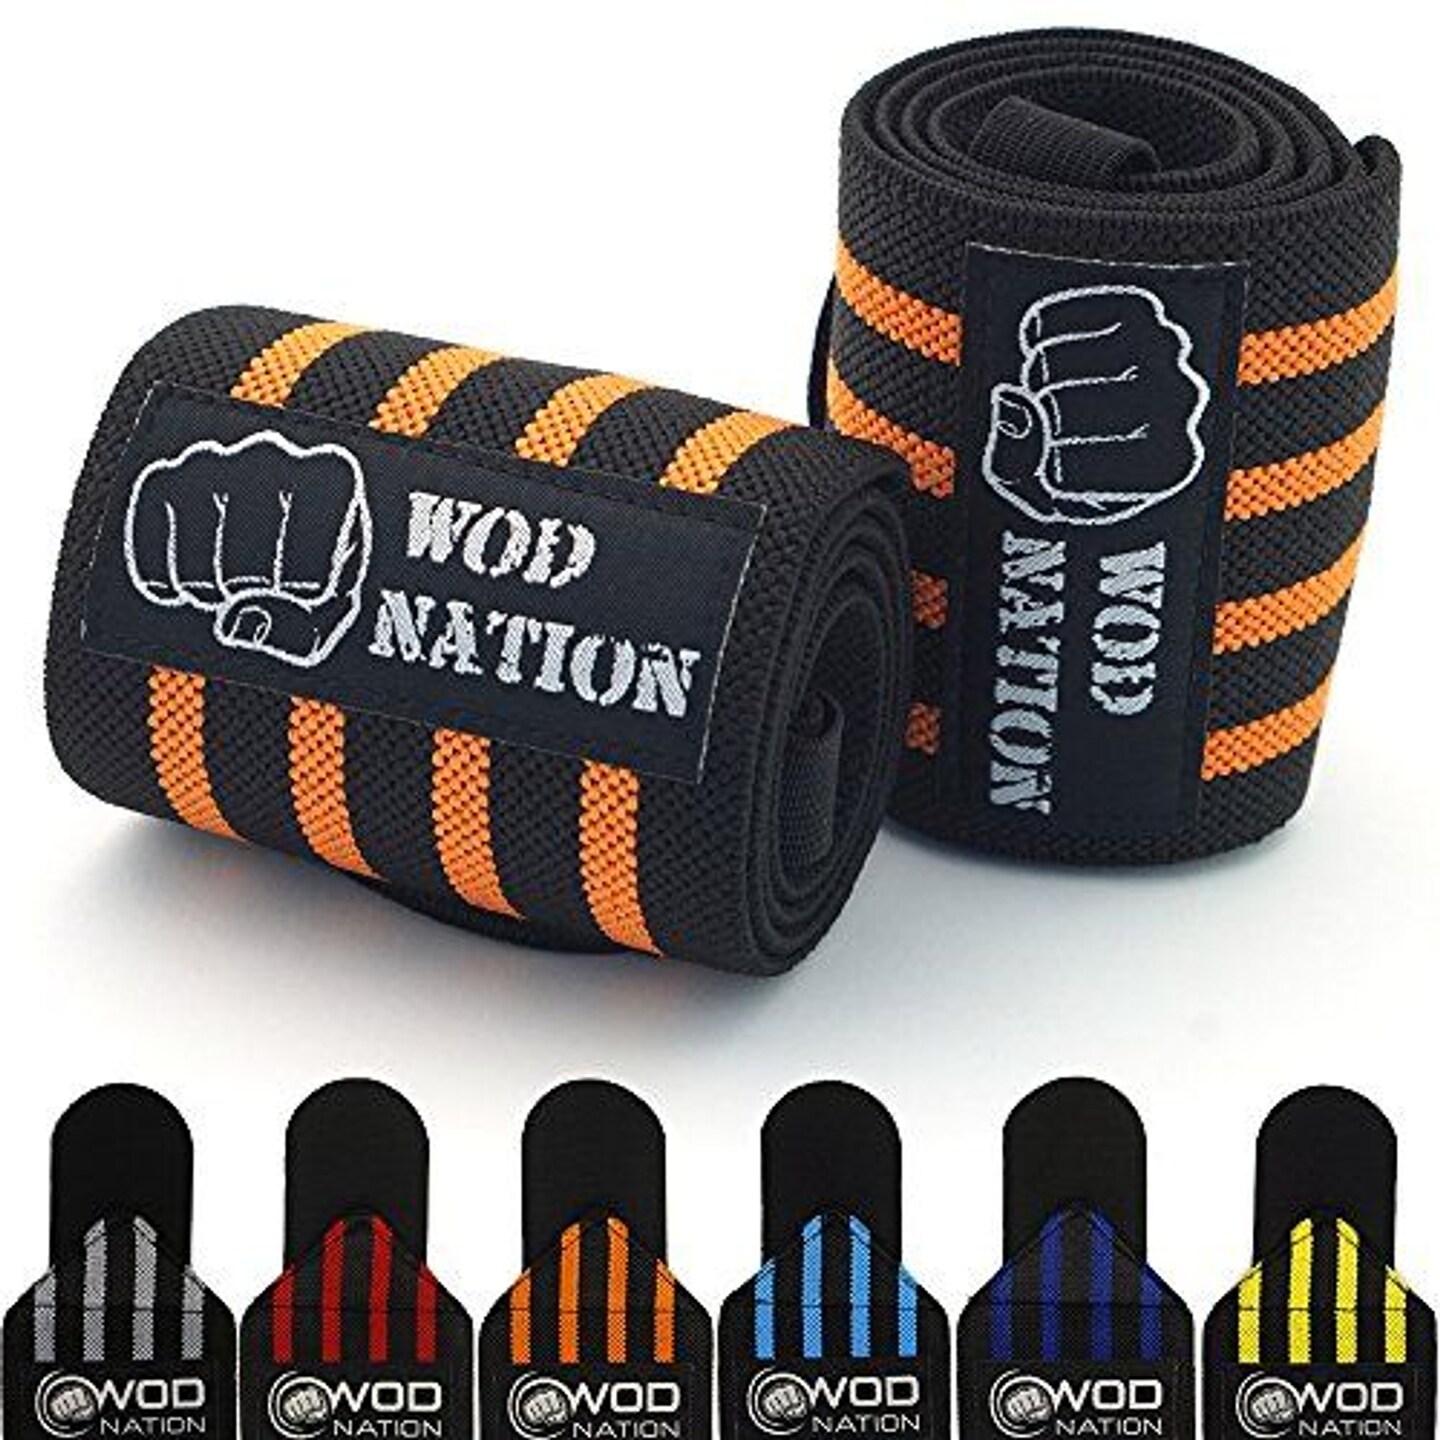 WOD Nation Wrist Wraps &#x26; Straps for Gym &#x26; Weightlifting (24 inch) - Essential Weight Lifting Wrist Wraps &#x26; Gym Wrist Straps Support for Optimal Powerlifting Performance For Women &#x26; Men - Black/Orange